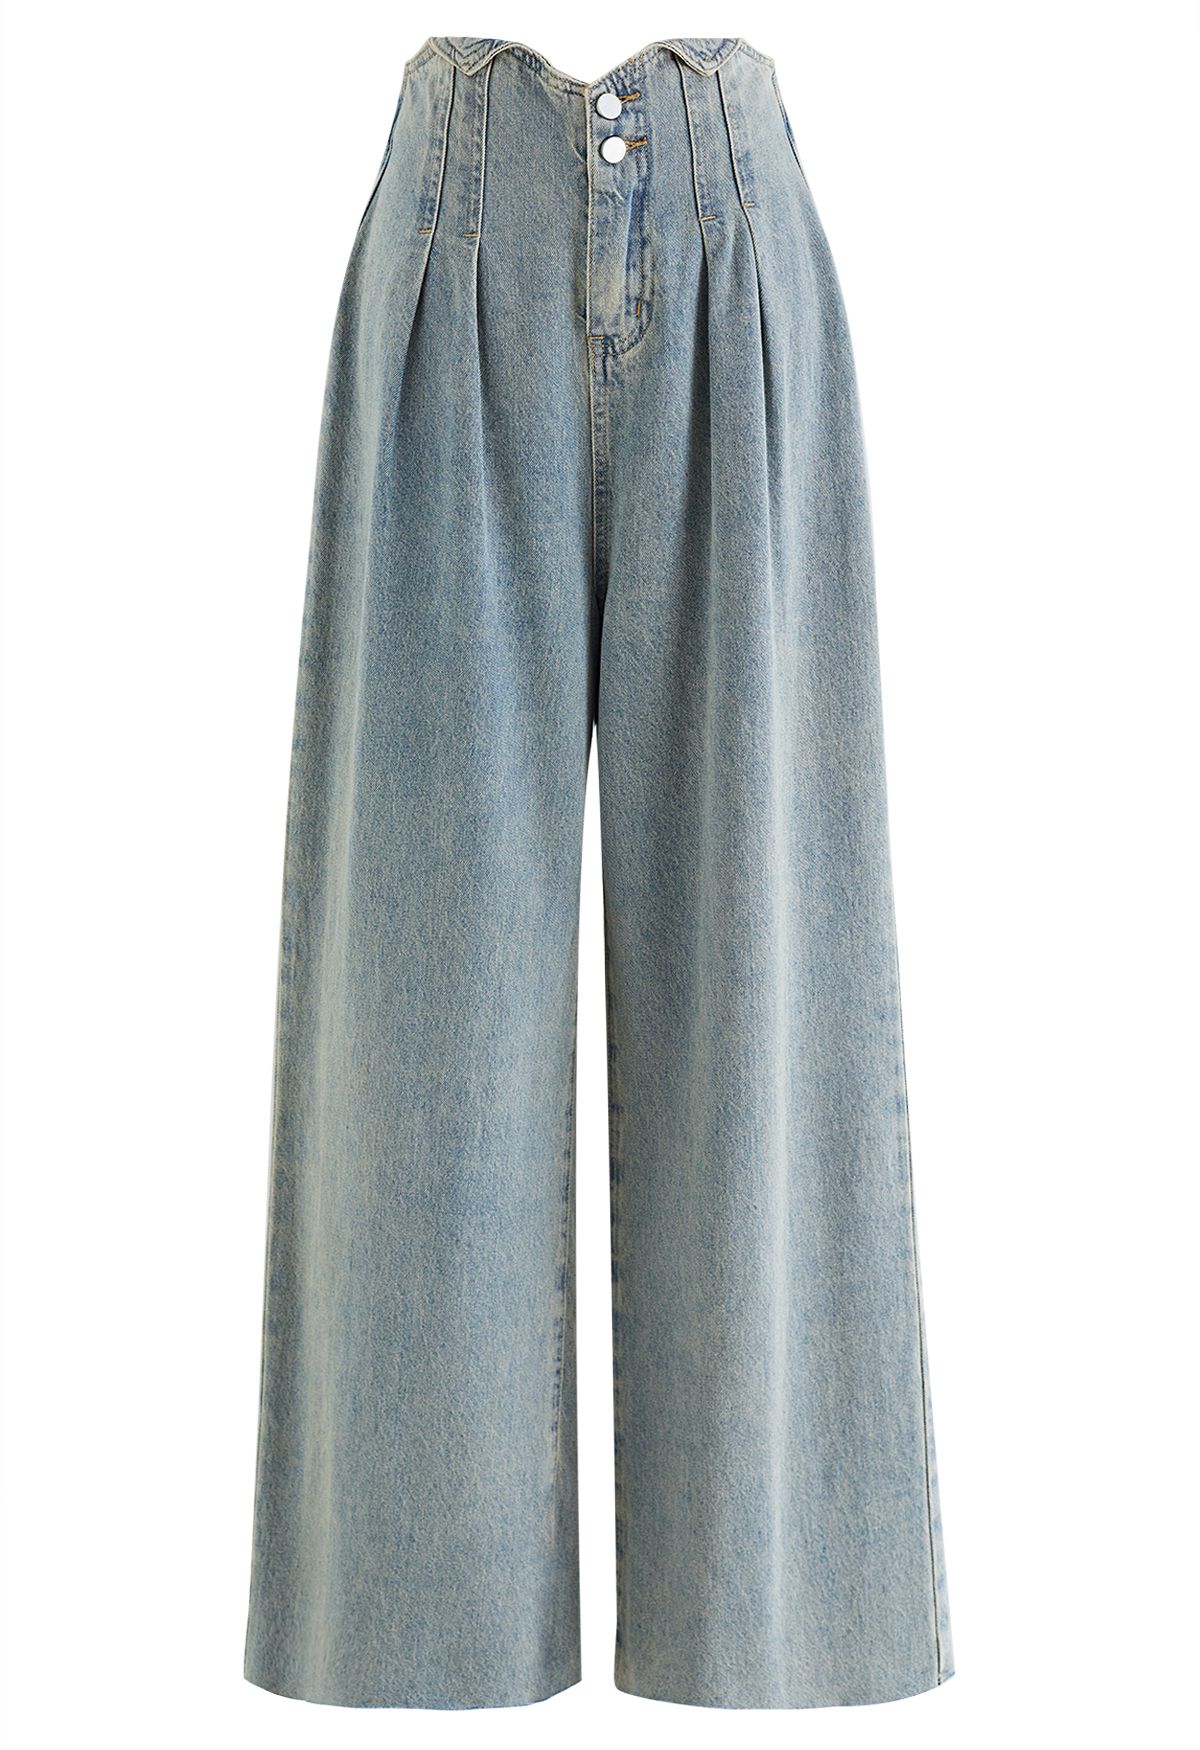 Notched Edge Pleated Wide-Leg Jeans in Light Blue